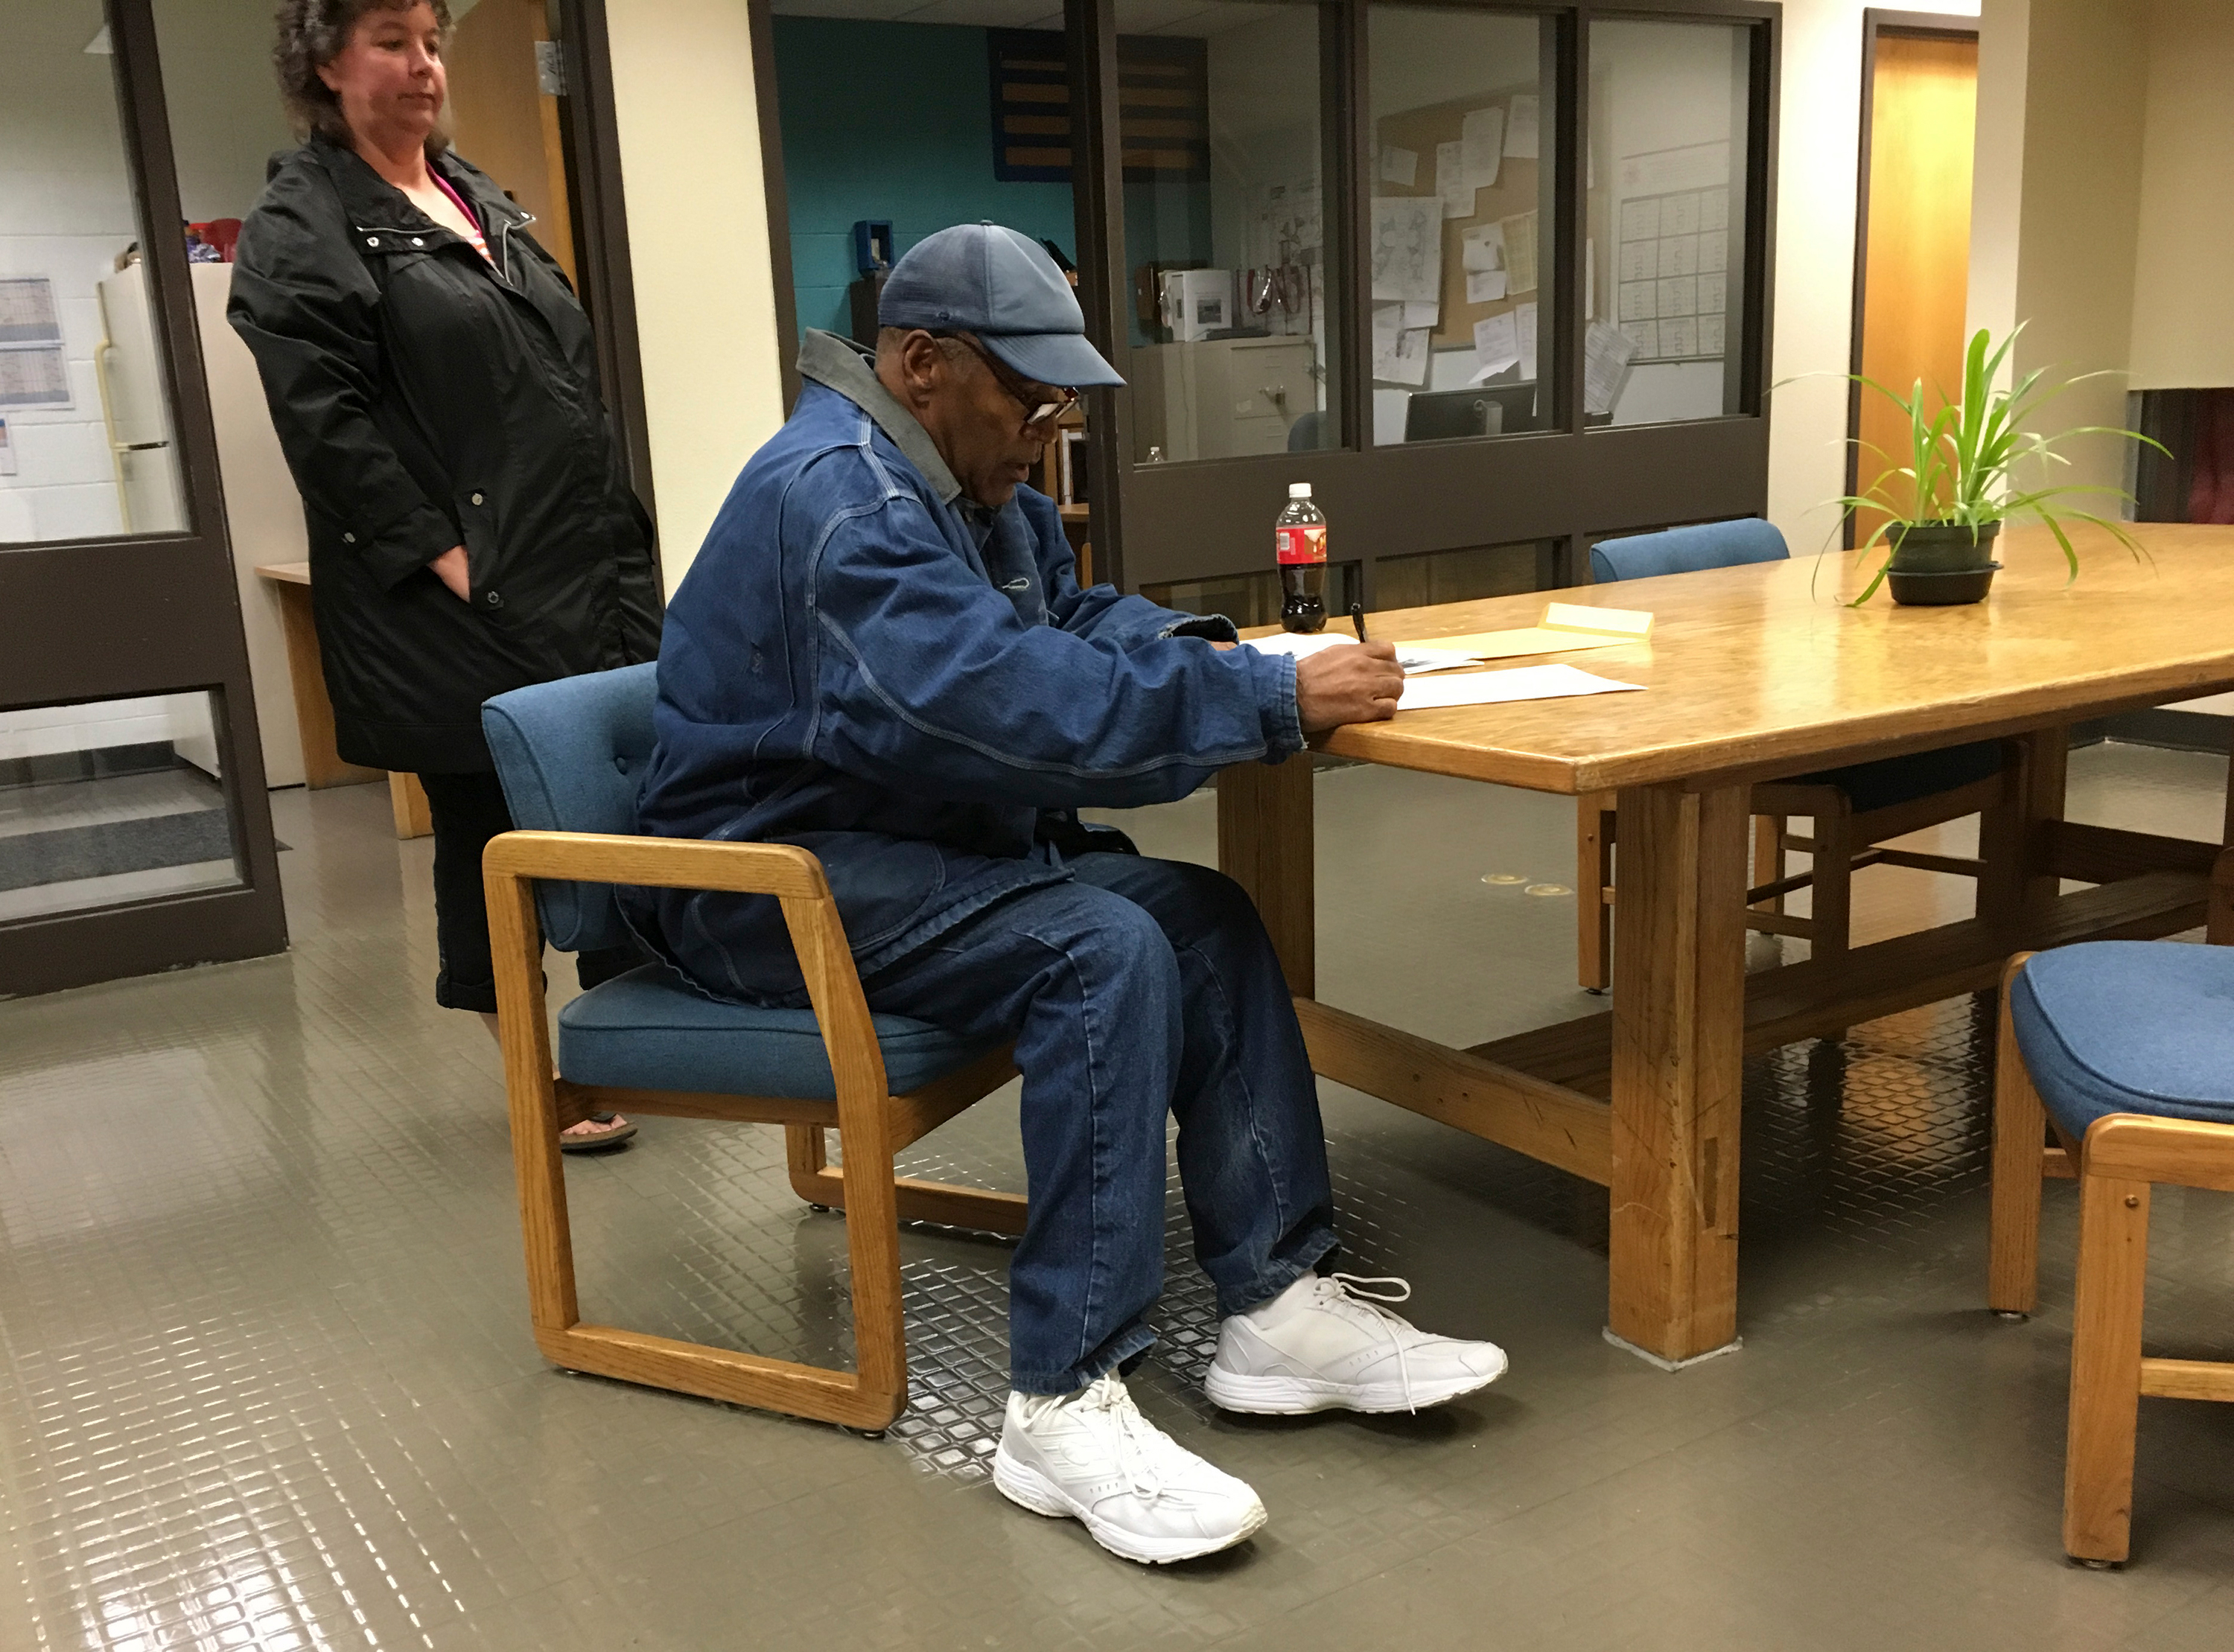 Simpson signs documents at the Lovelock Correctional Center in Nevada in September 2017, before being released. He had been serving time for his involvement in a 2007 armed robbery in Las Vegas.